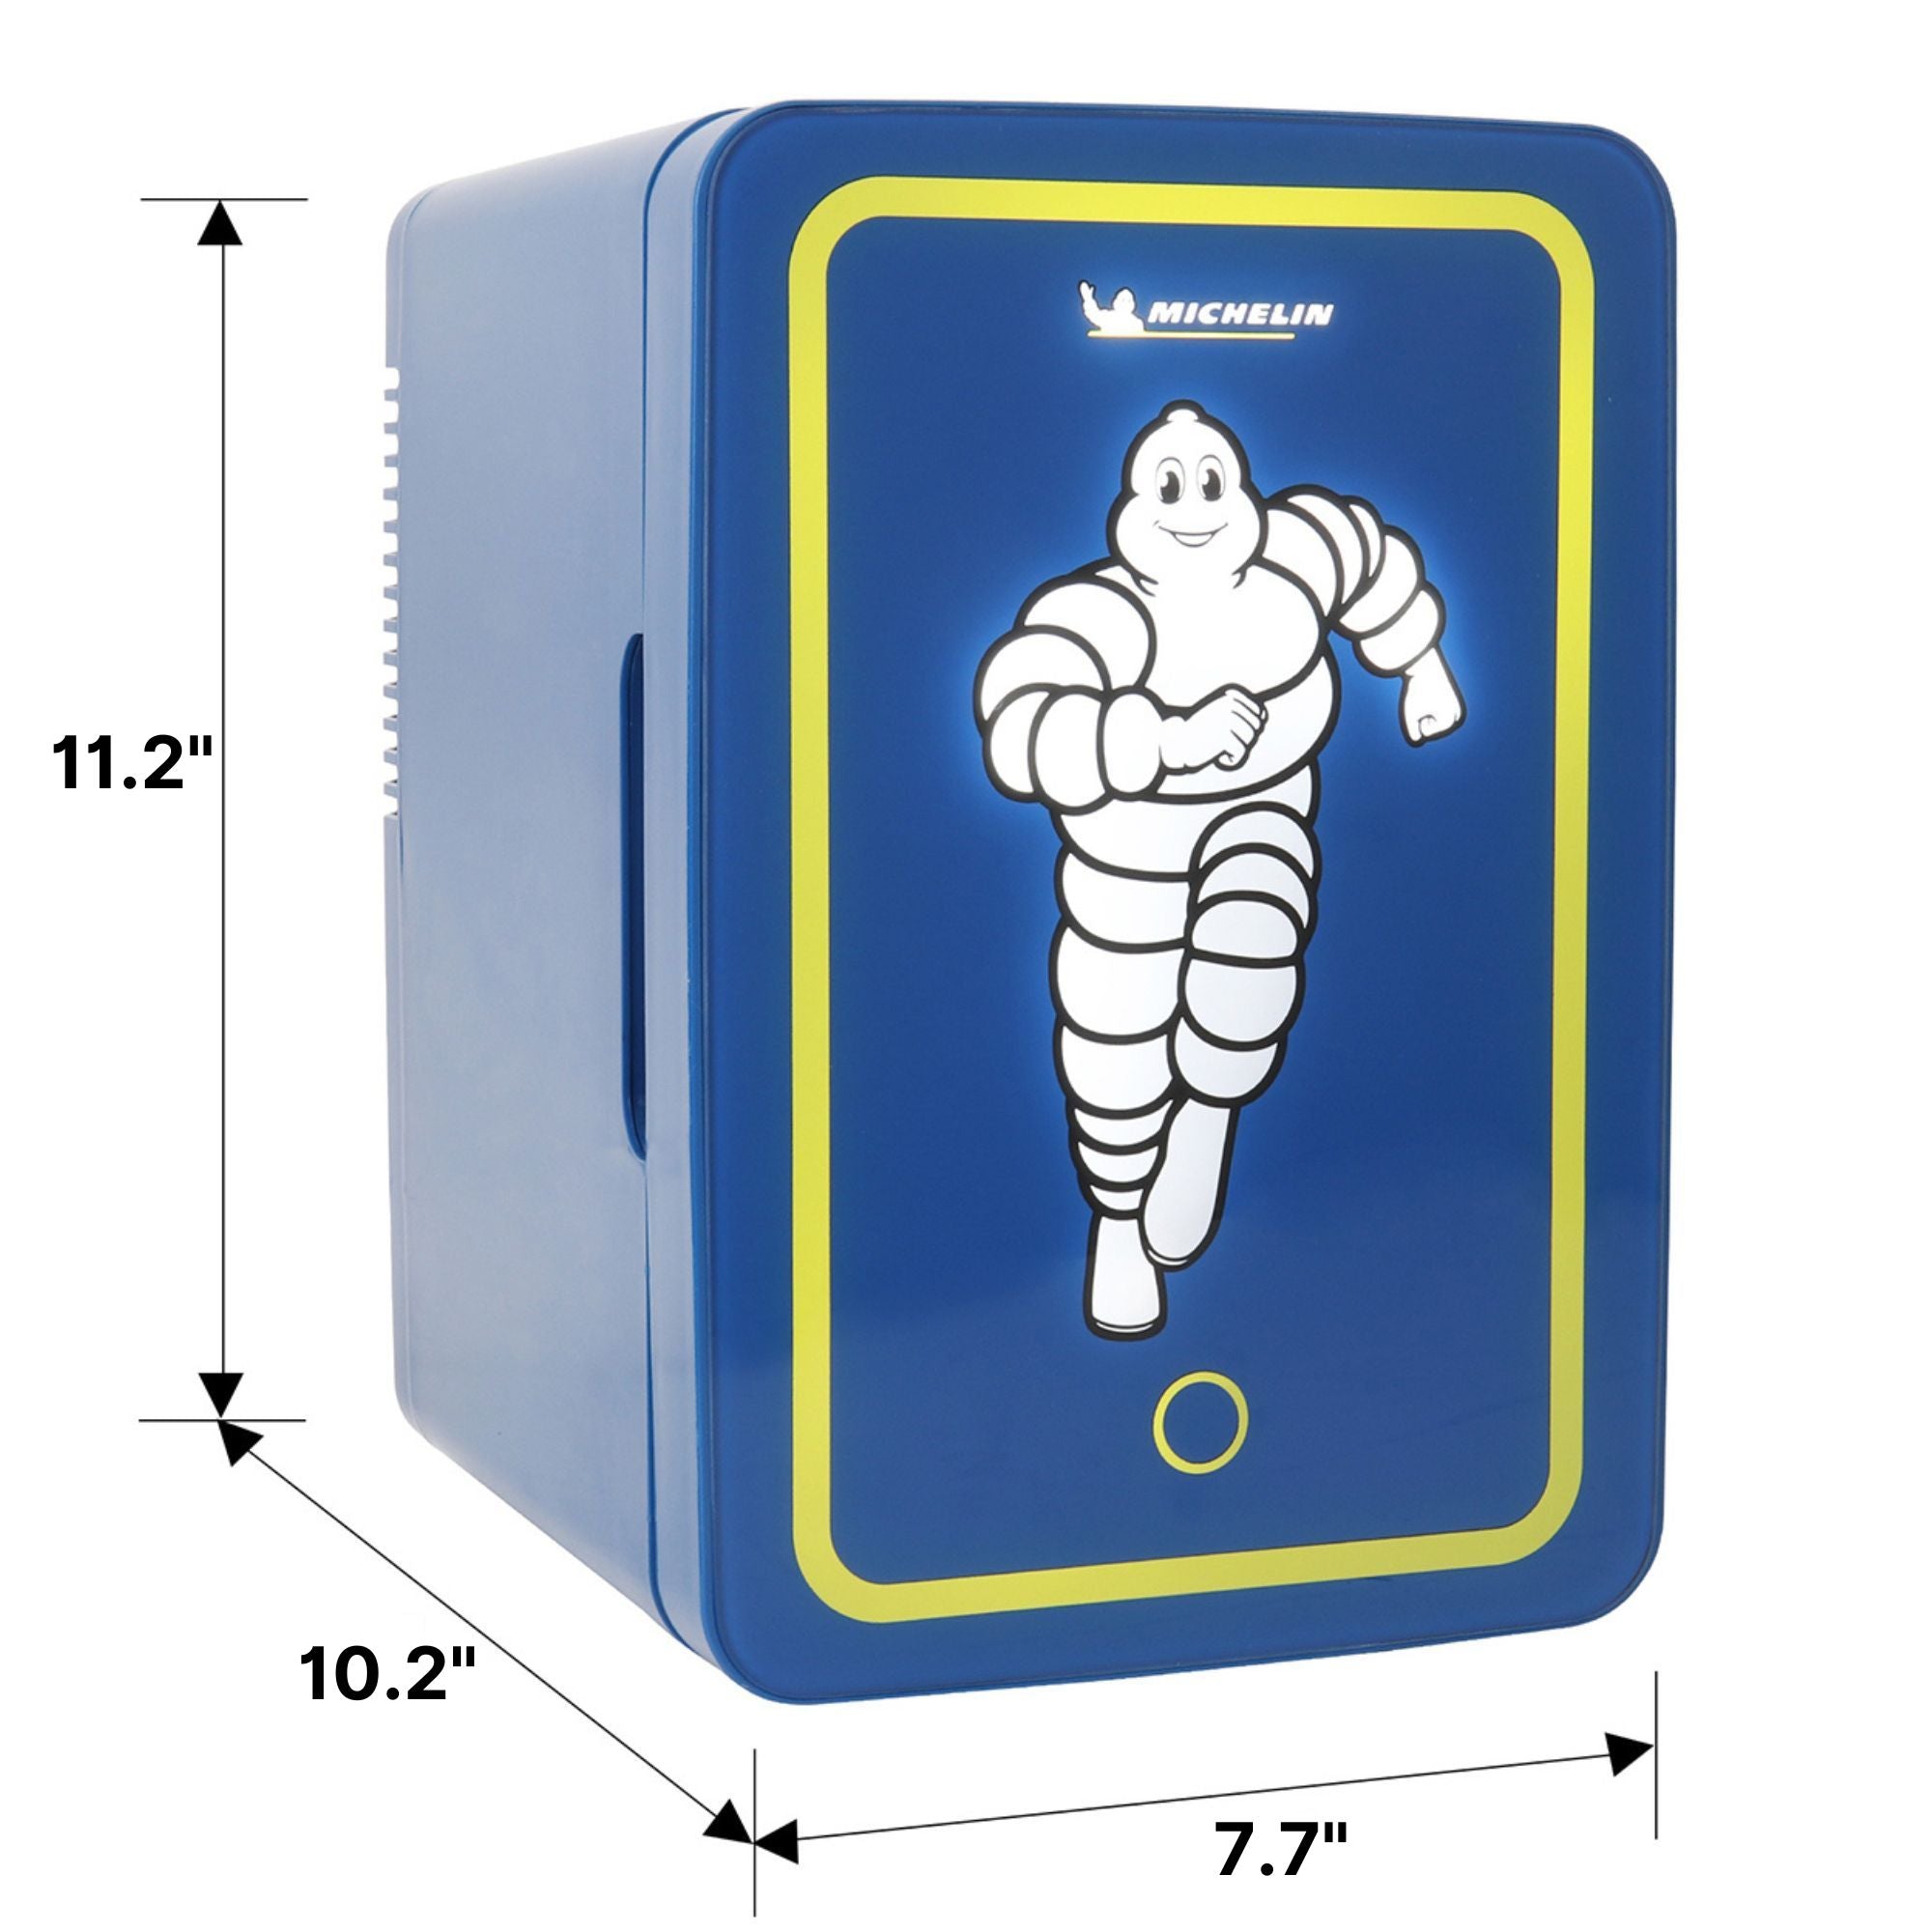 Michelin mini fridge, closed, on a white background with dimensions labeled